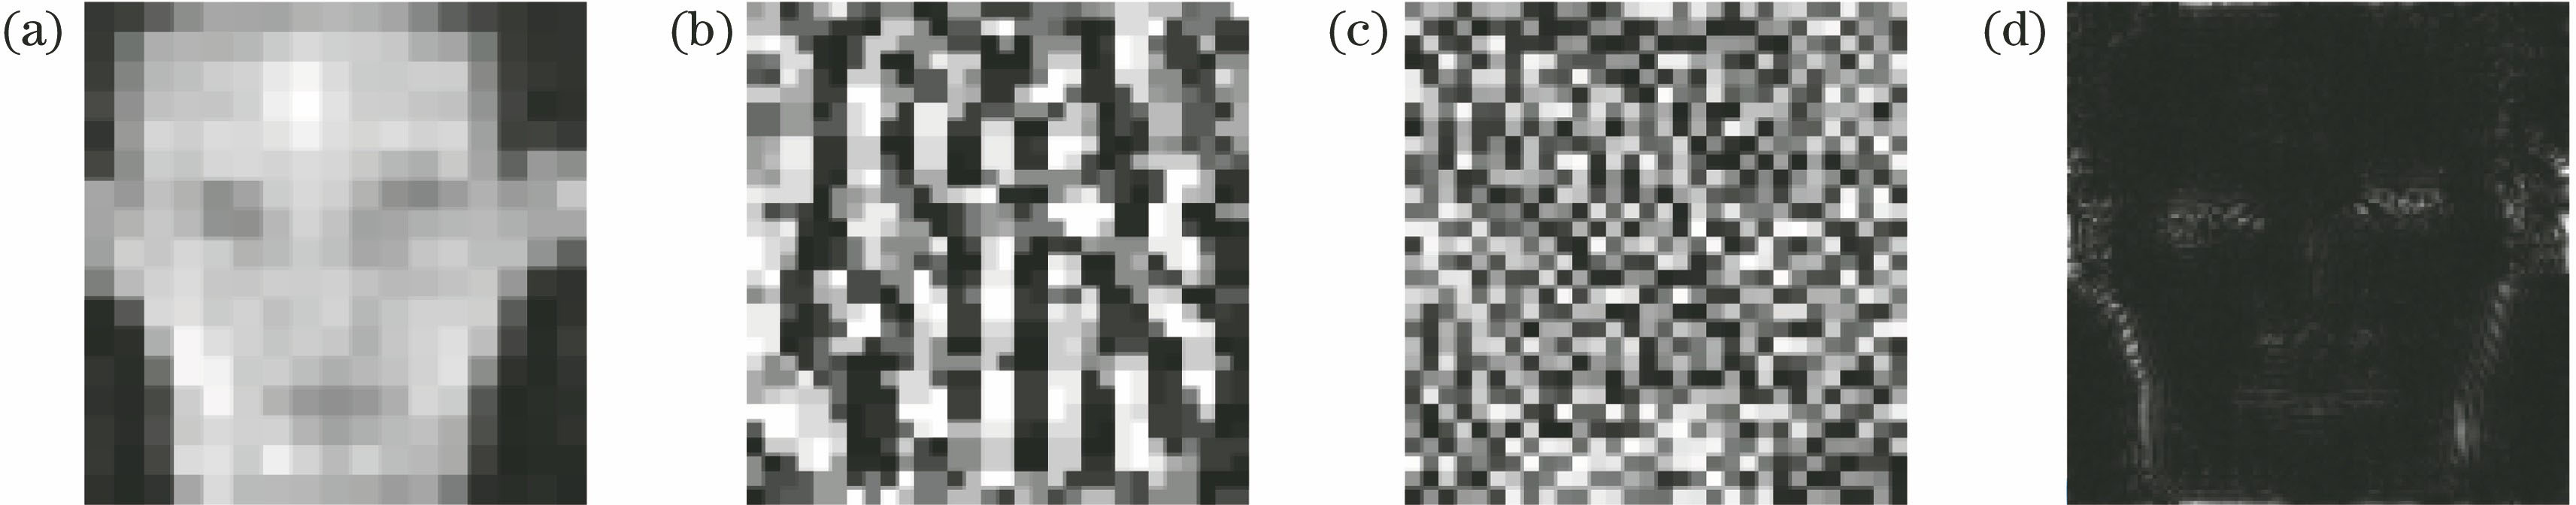 Fusion images at four scales. (a) Scale 1; (b) scale 2; (c) scale 3; (d) scale 4